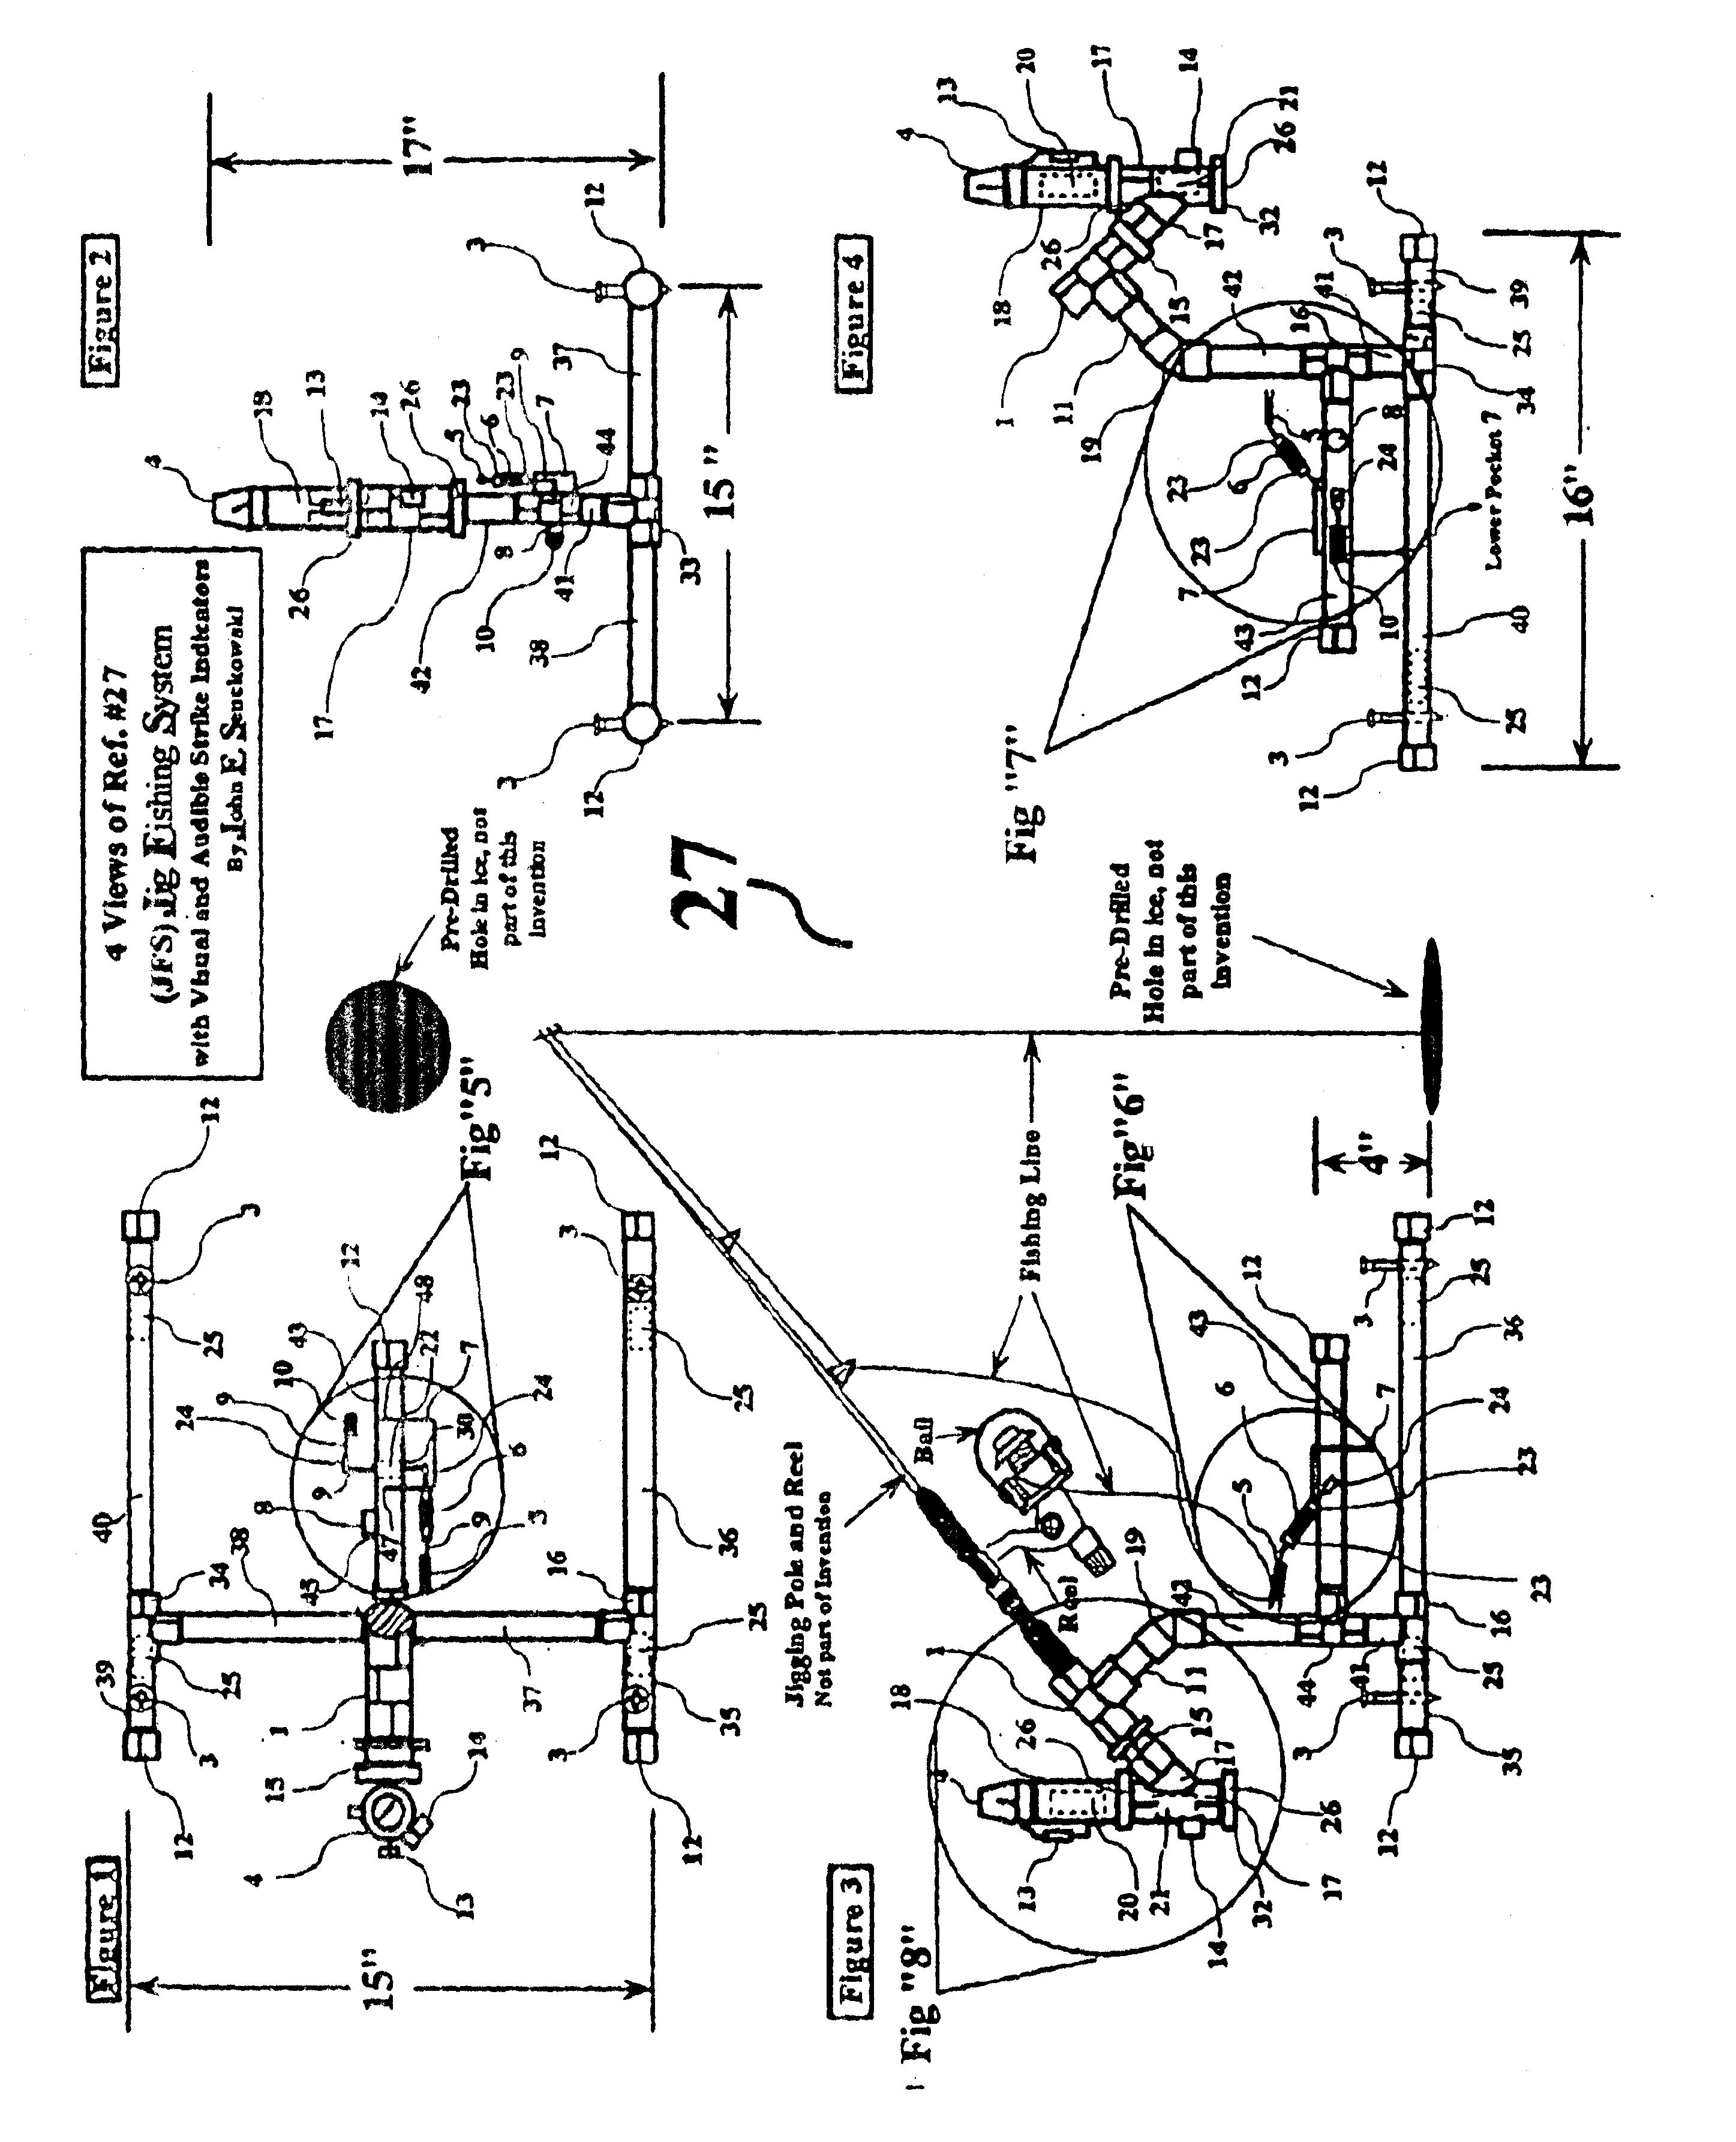 Apparatus and method for fishing utilizing the jig fishing system